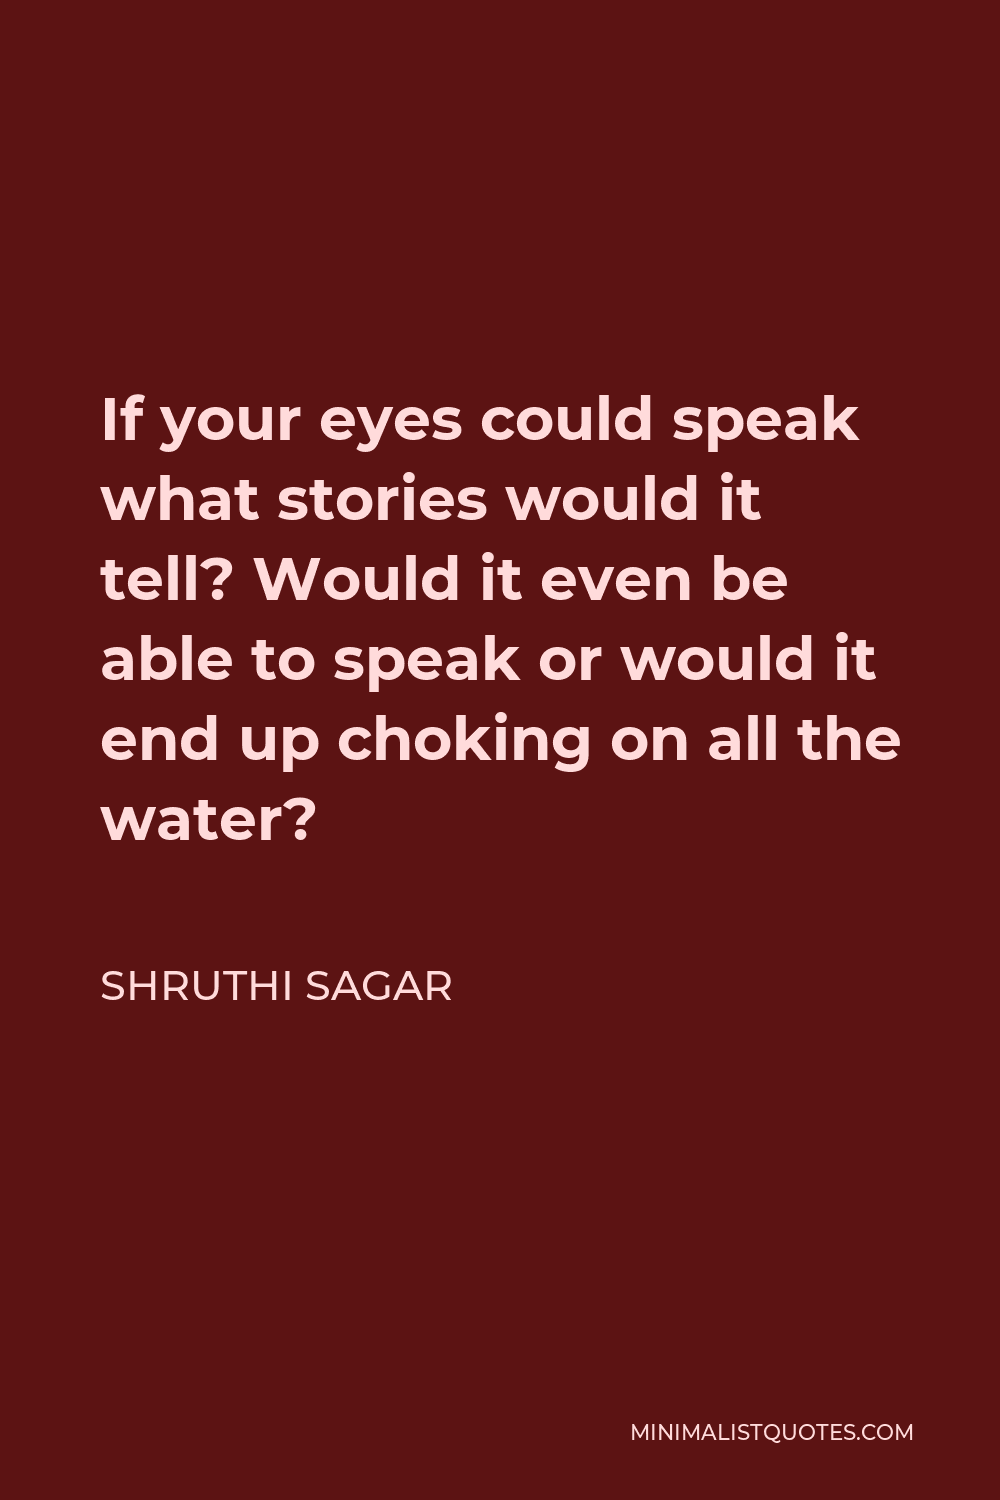 Shruthi Sagar Quote - If your eyes could speak what stories would it tell? Would it even be able to speak or would it end up choking on all the water?